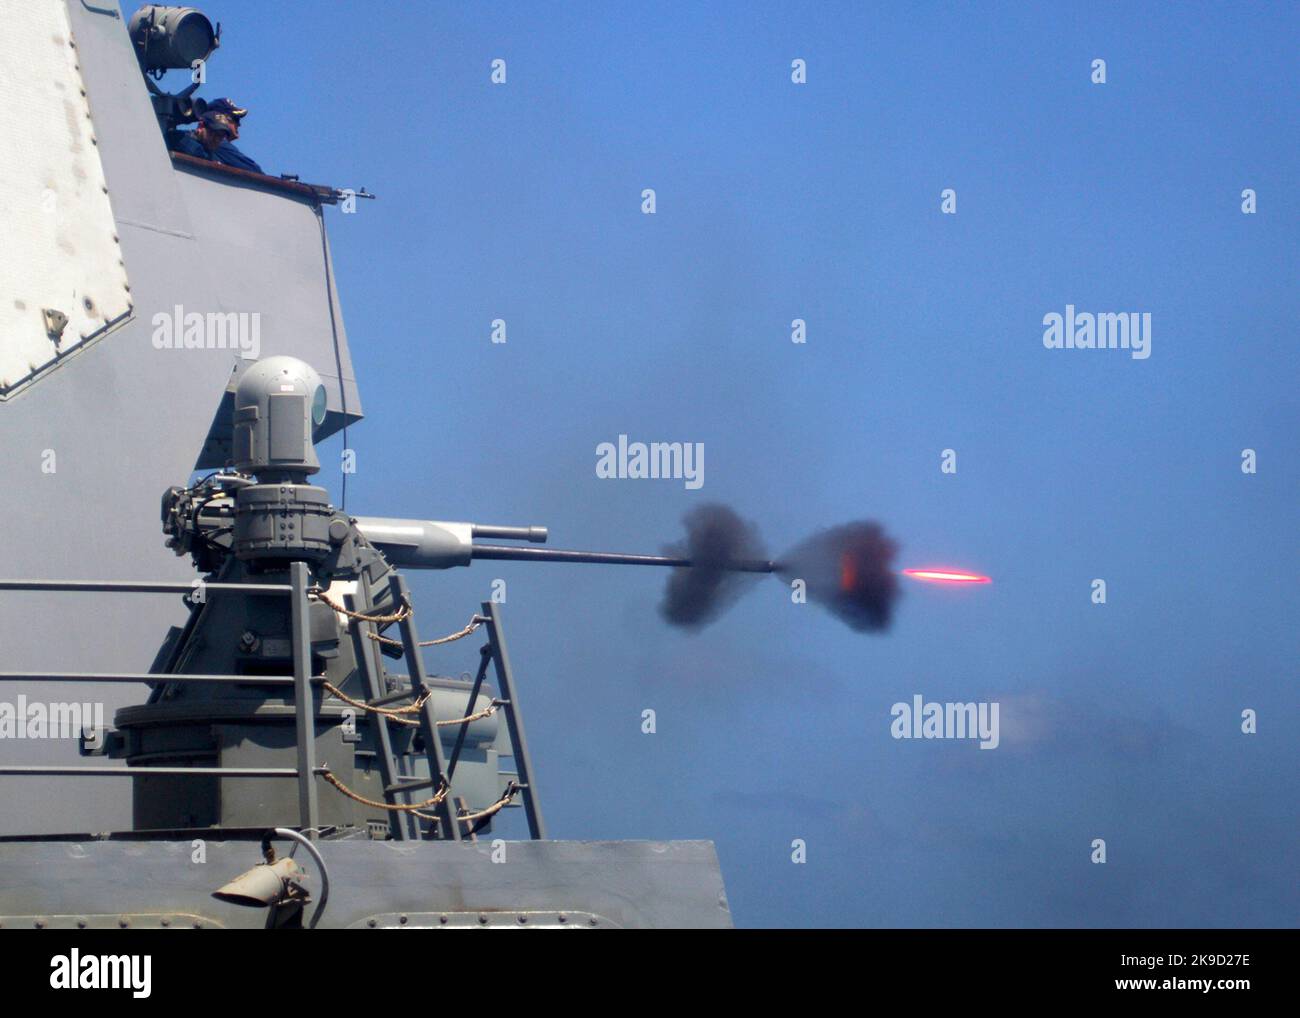 An MK-38 25mm gun system is fired during a live-fire exercise aboard the guided-missile destroyer USS Mason (DDG 87). U.S. Navy. The Mark 38 25 mm Machine Gun System (MGS) is a shipboard weapon system designed to protect warships primarily from a variety of surface threats, especially small, fast surface craft. It consists of an M242 Bushmaster chain gun mounted on a turret that can be either manually or remote controlled, depending on variant. Stock Photo